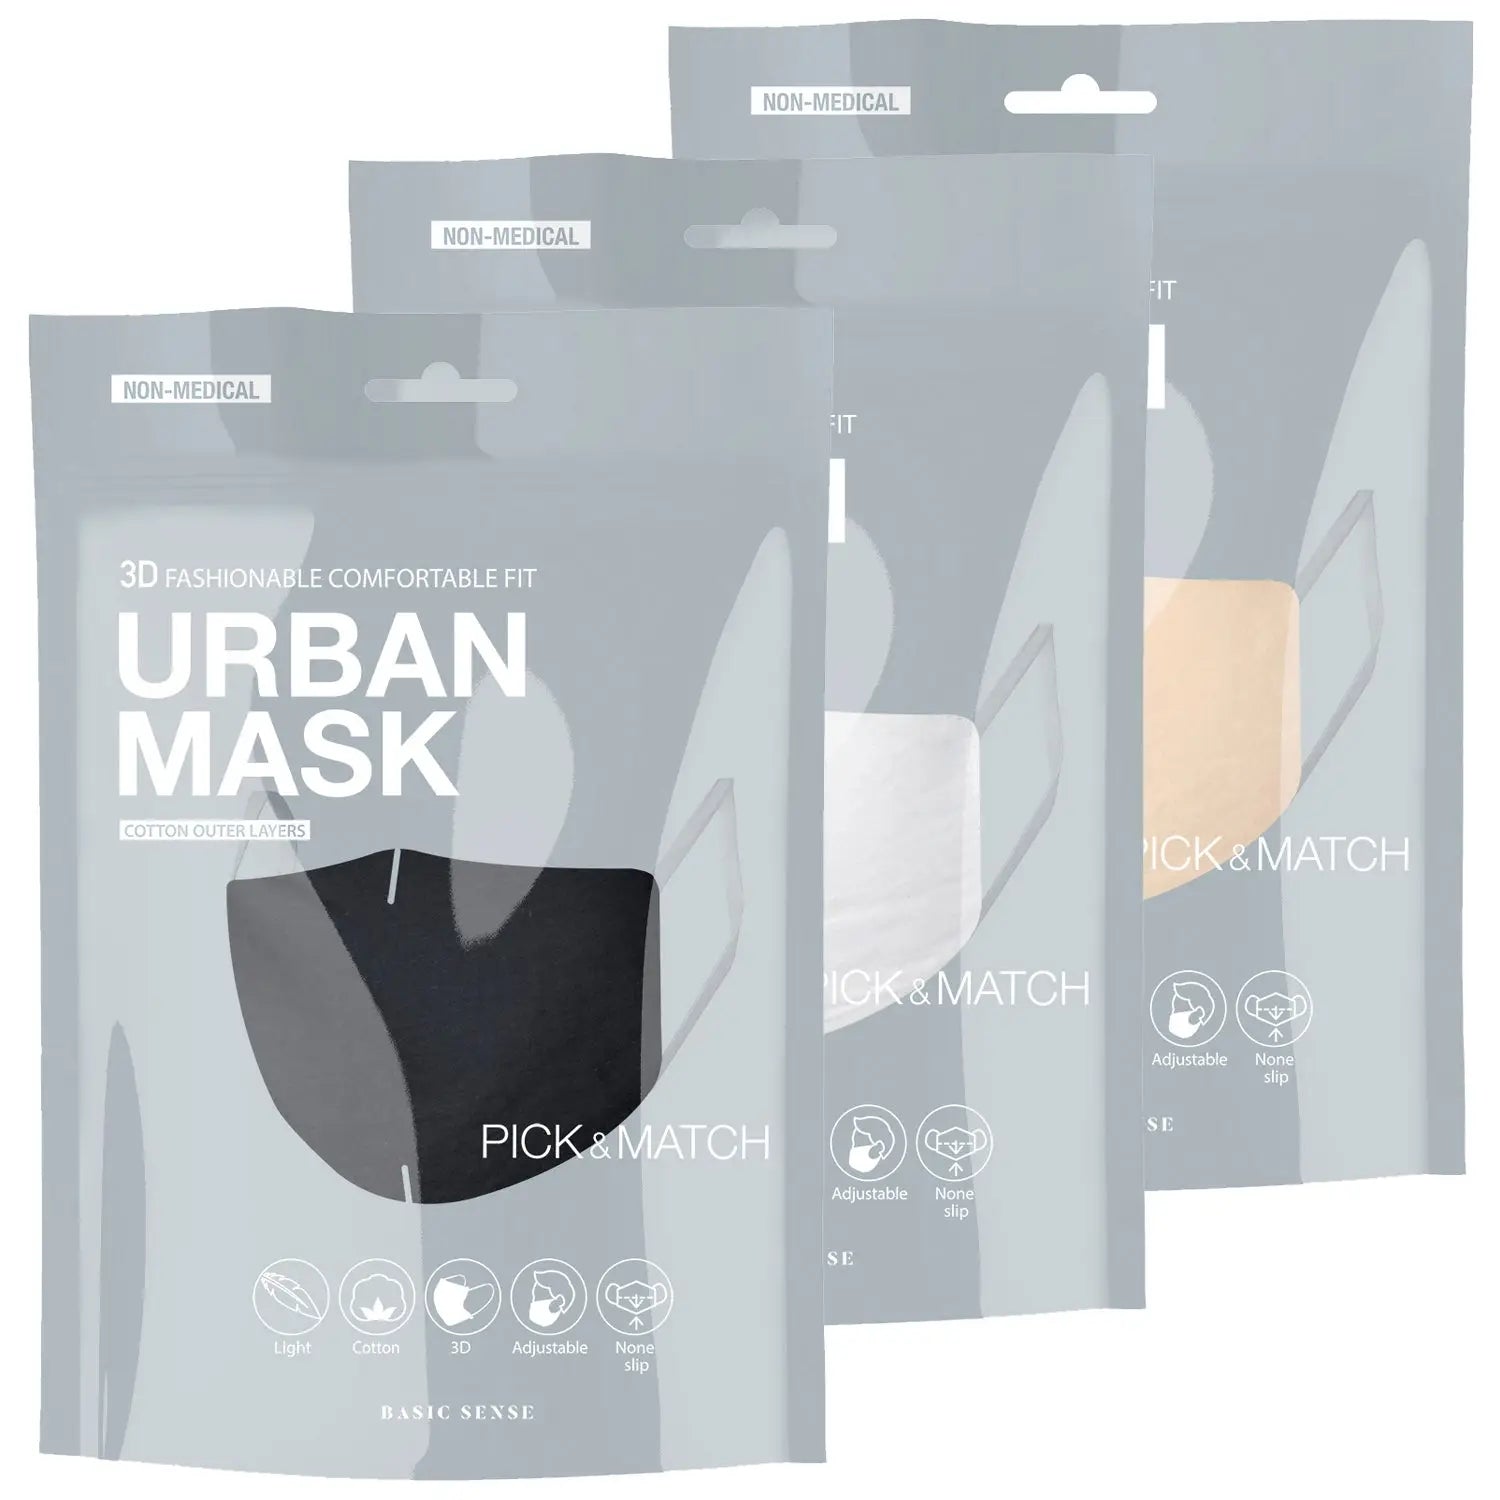 3 pack of urban mask in 3D Design 100% Cotton Fashion Face Mask Covering